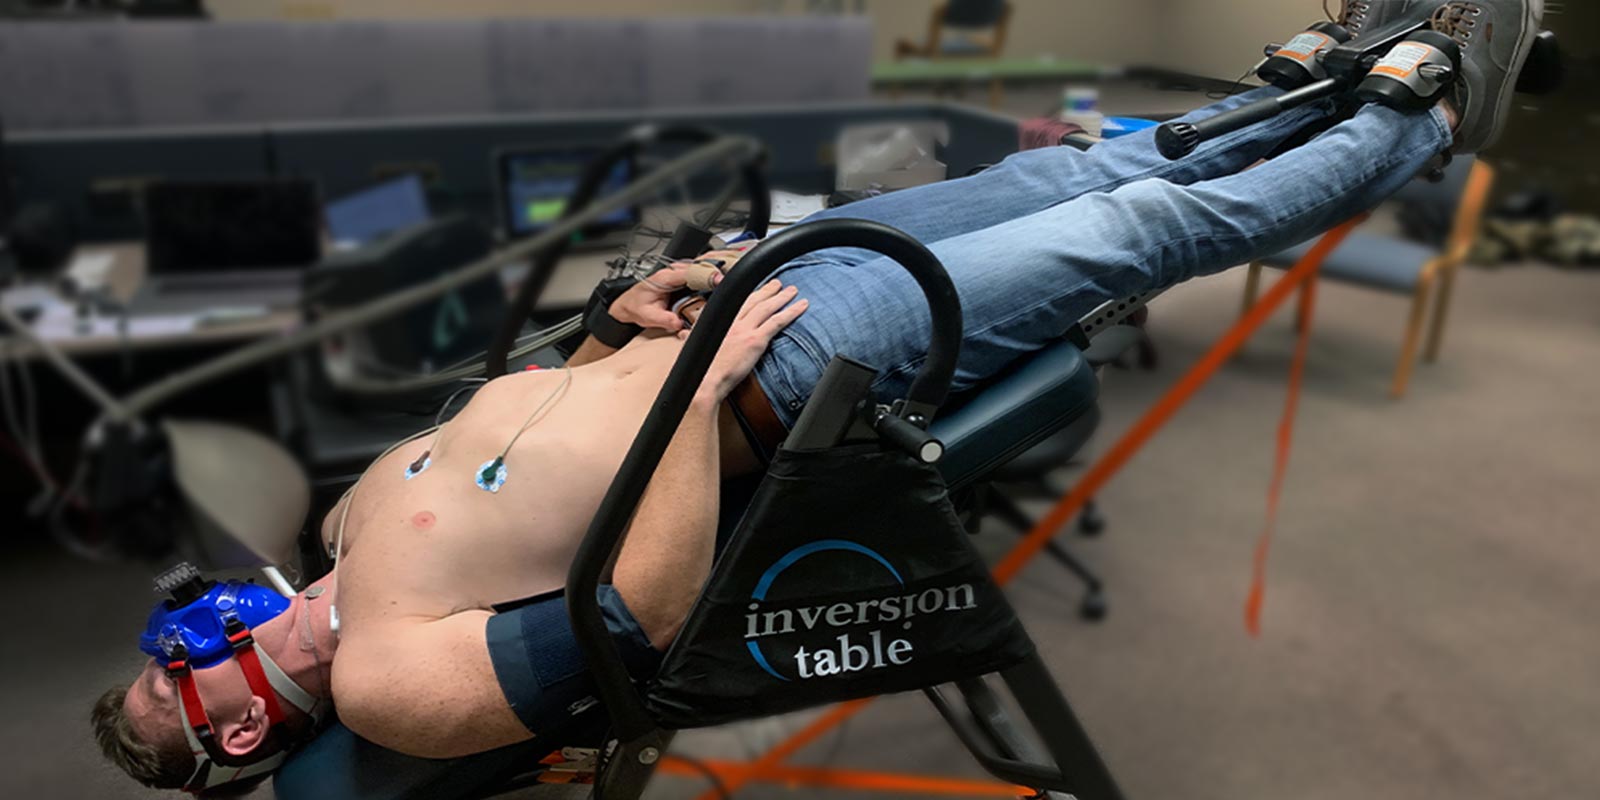 man laying on inversion table